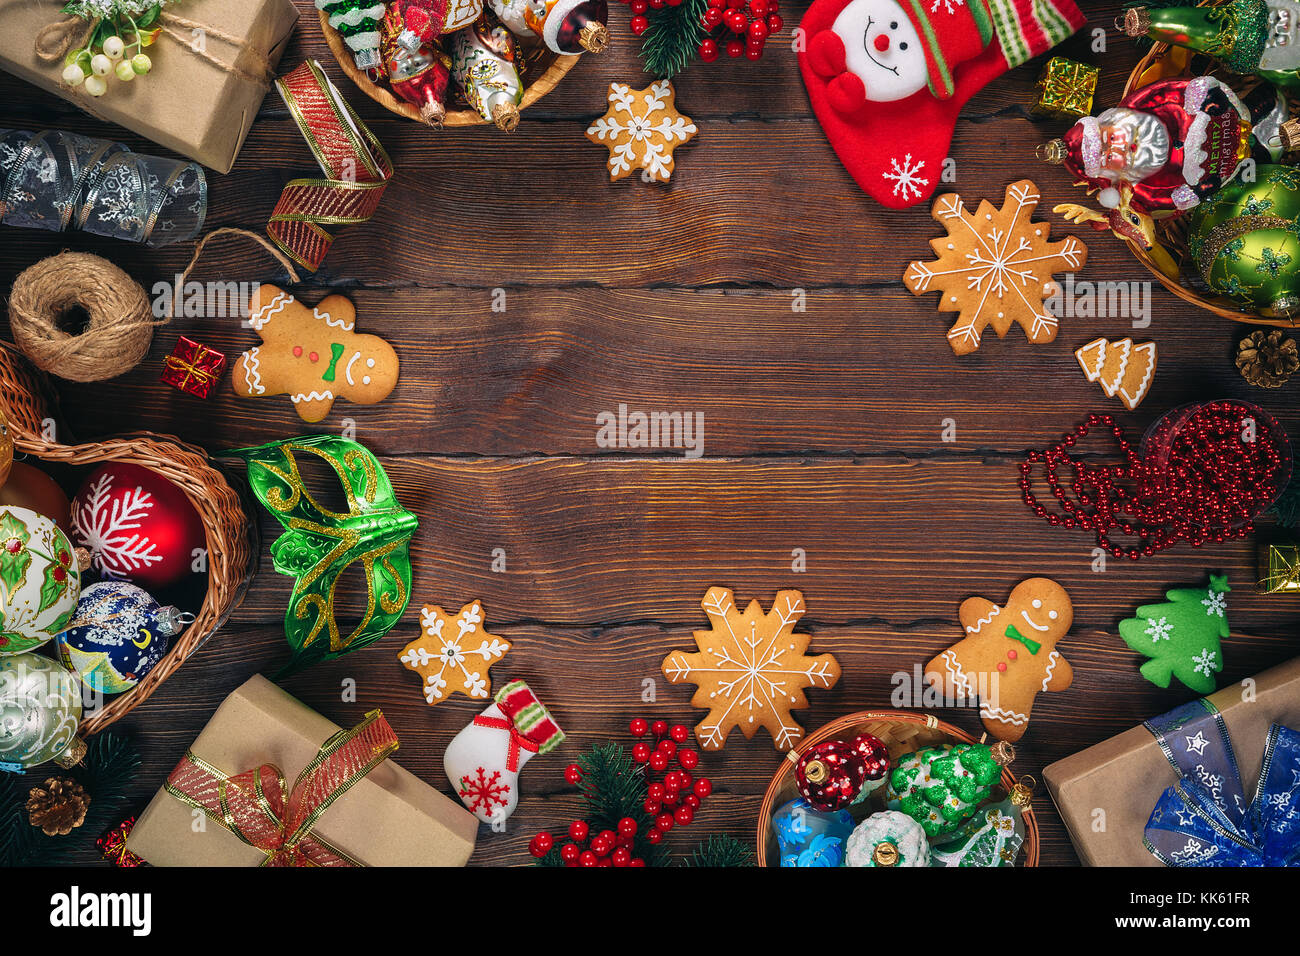 Christmas  background with gingerbread, decorations and gift boxes, balls, toy on vintage old wooden board. Beautiful xmas frame. Idea for advertising Stock Photo